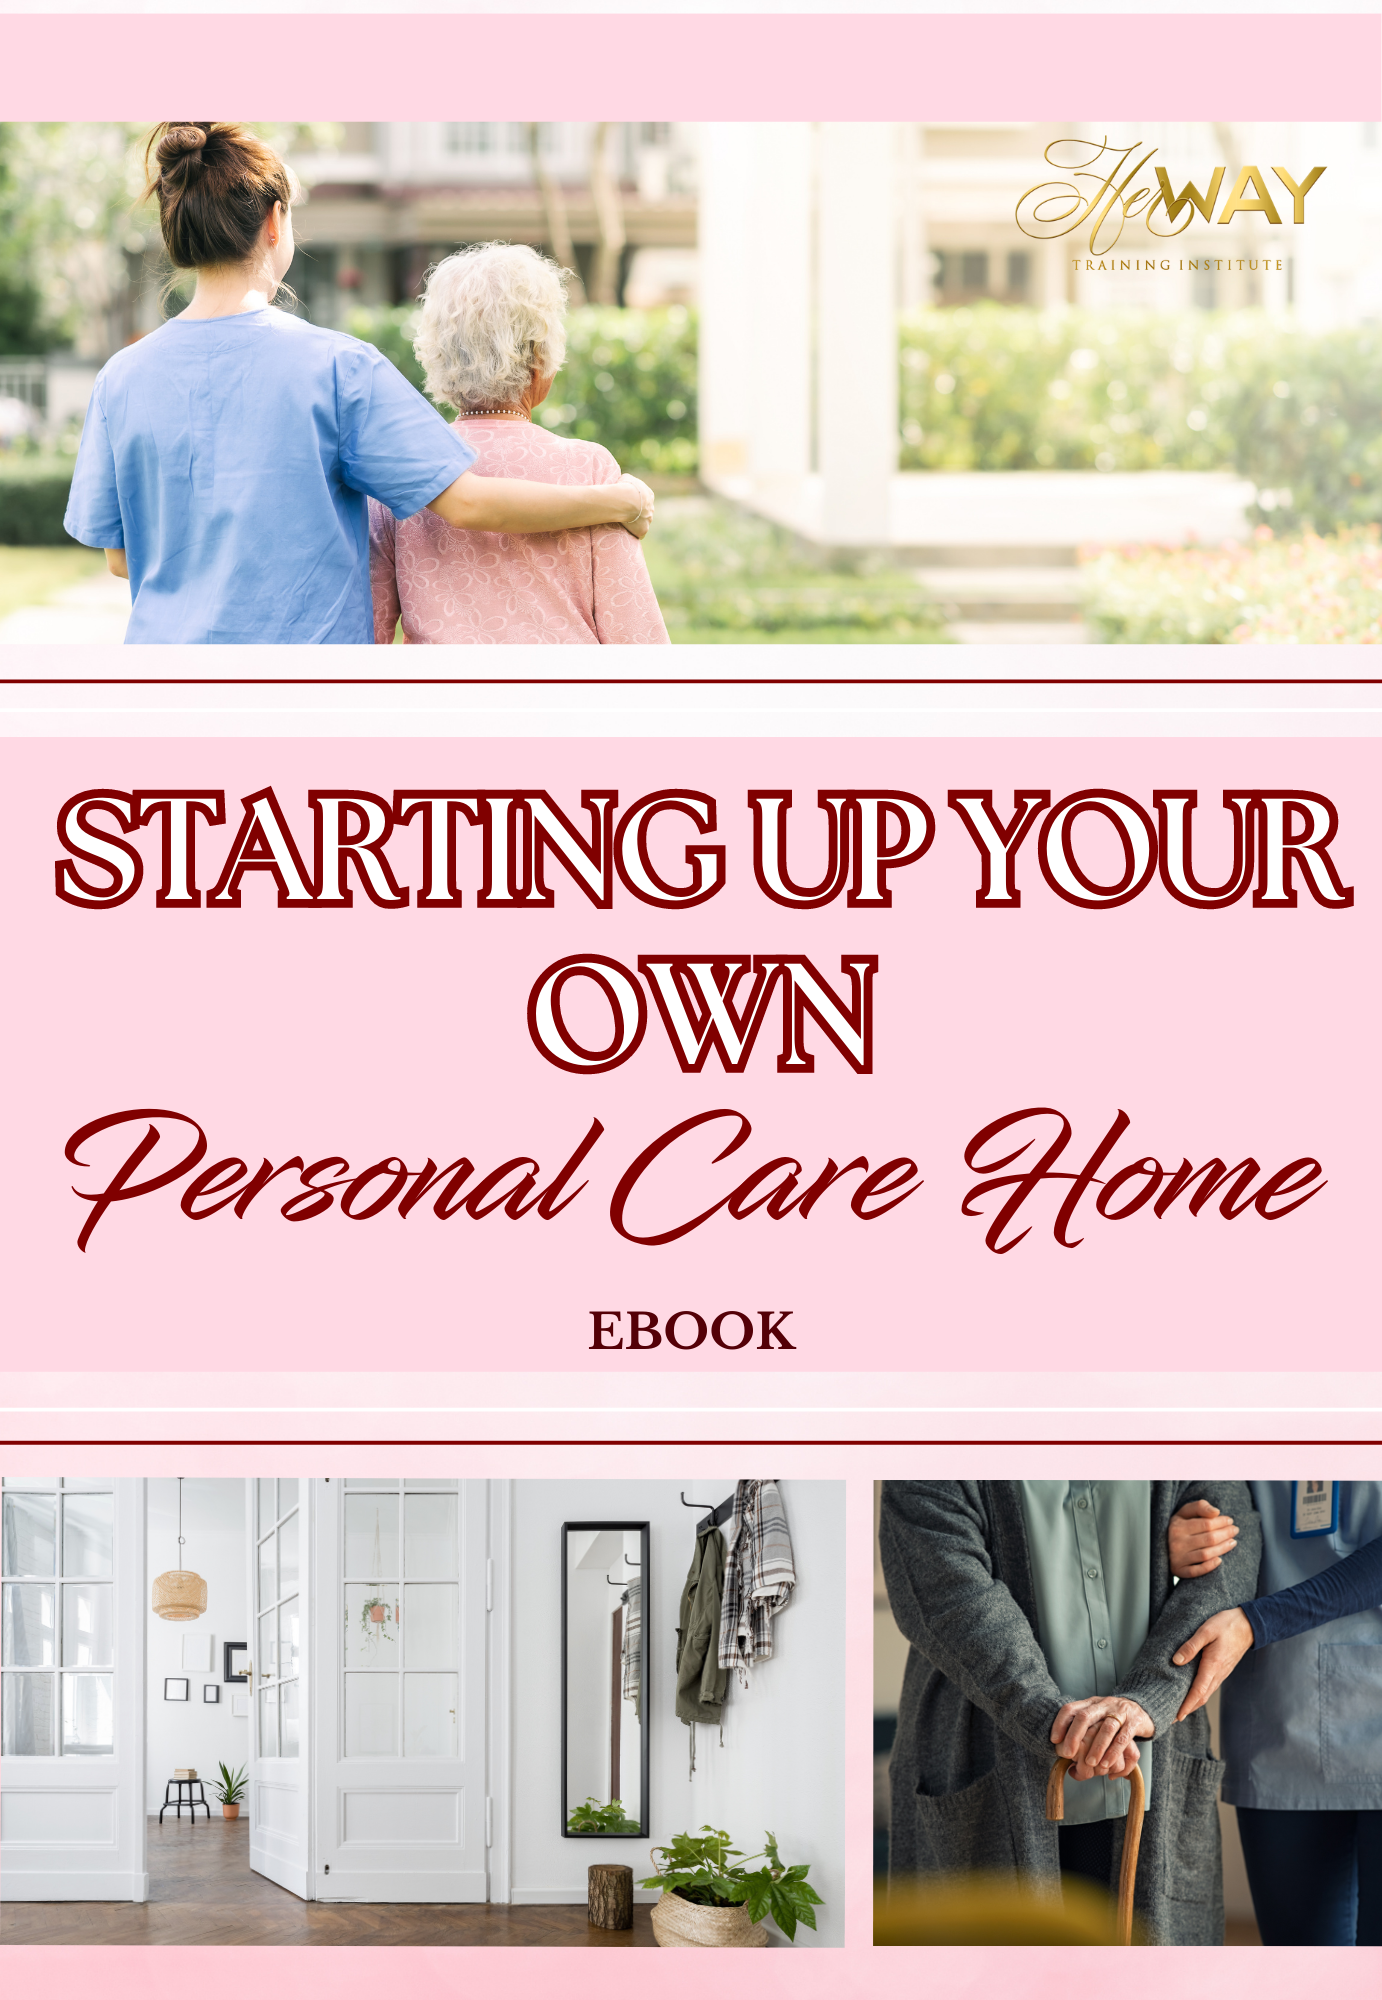 How To Start Your Own Personal Care Home Business Guide - eBook